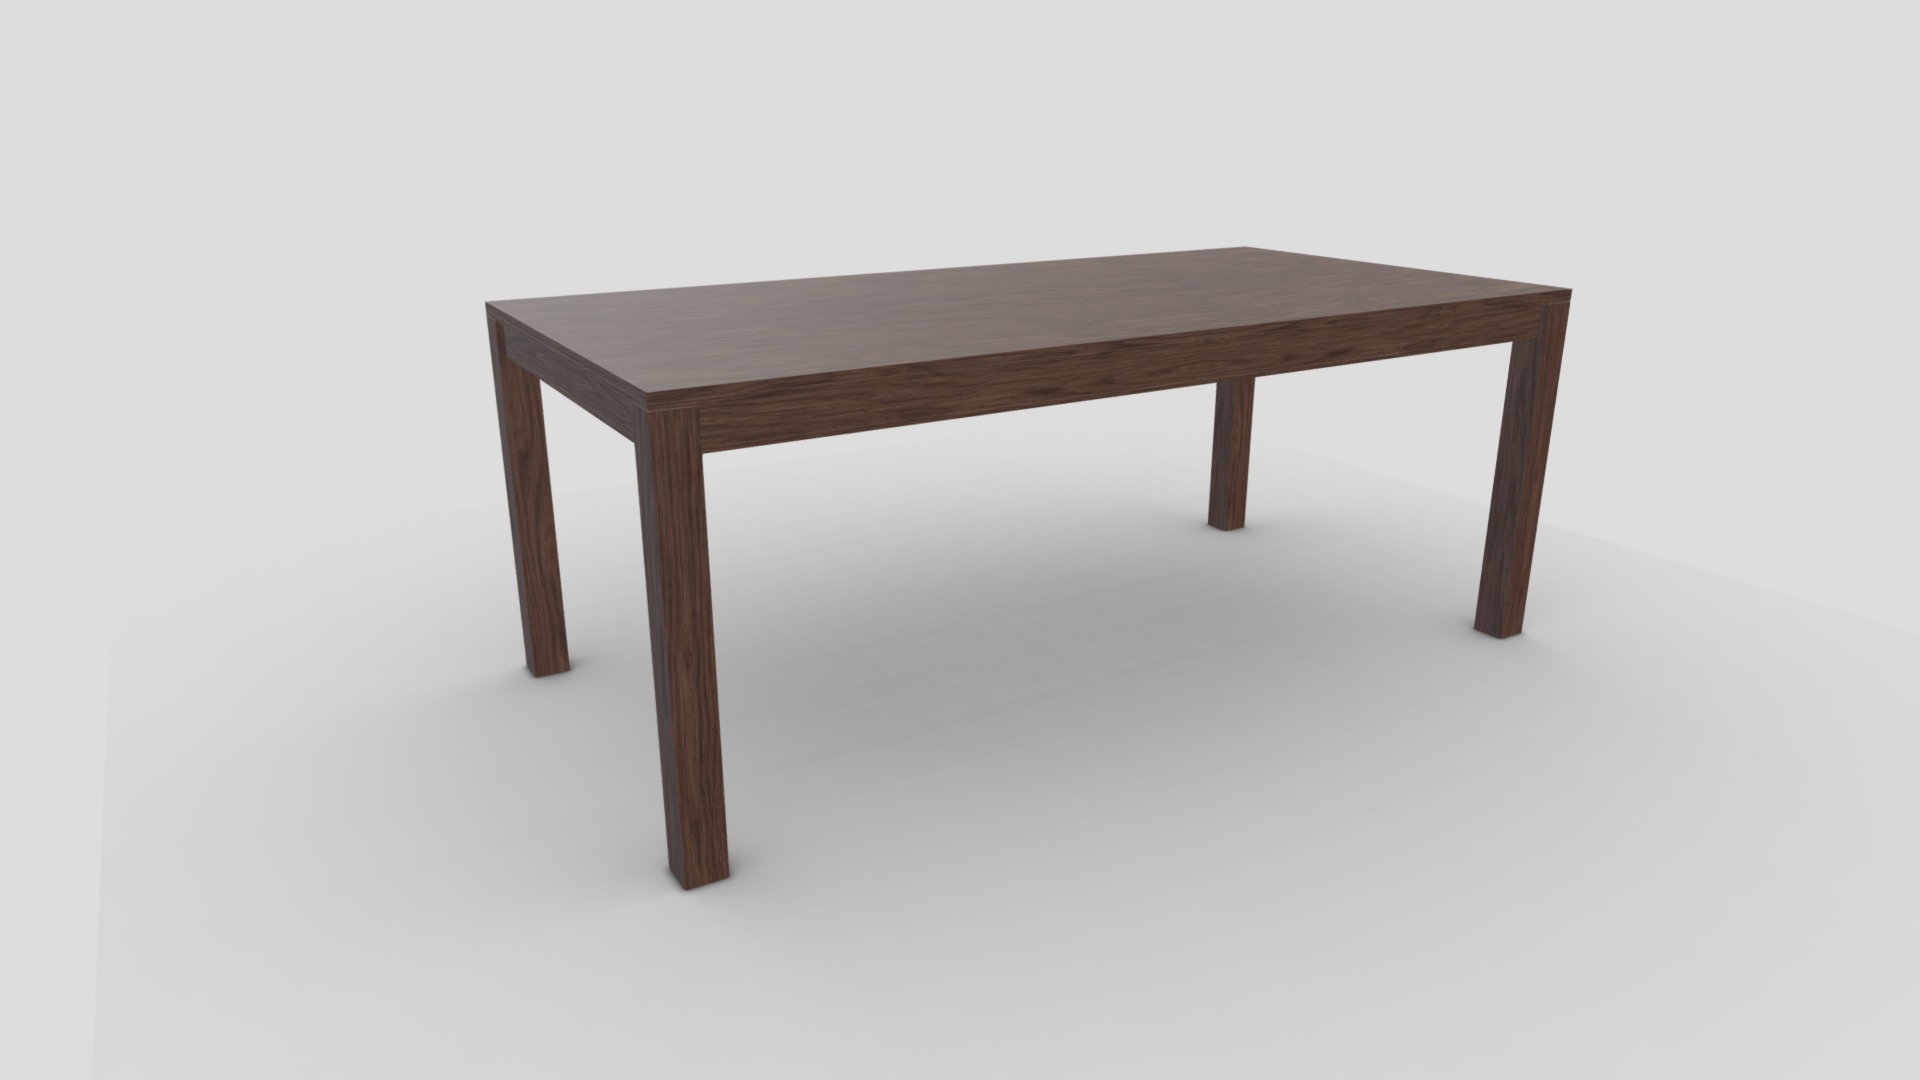 3D model Table 27 - This is a 3D model of the Table 27. The 3D model is about a wooden table with legs.